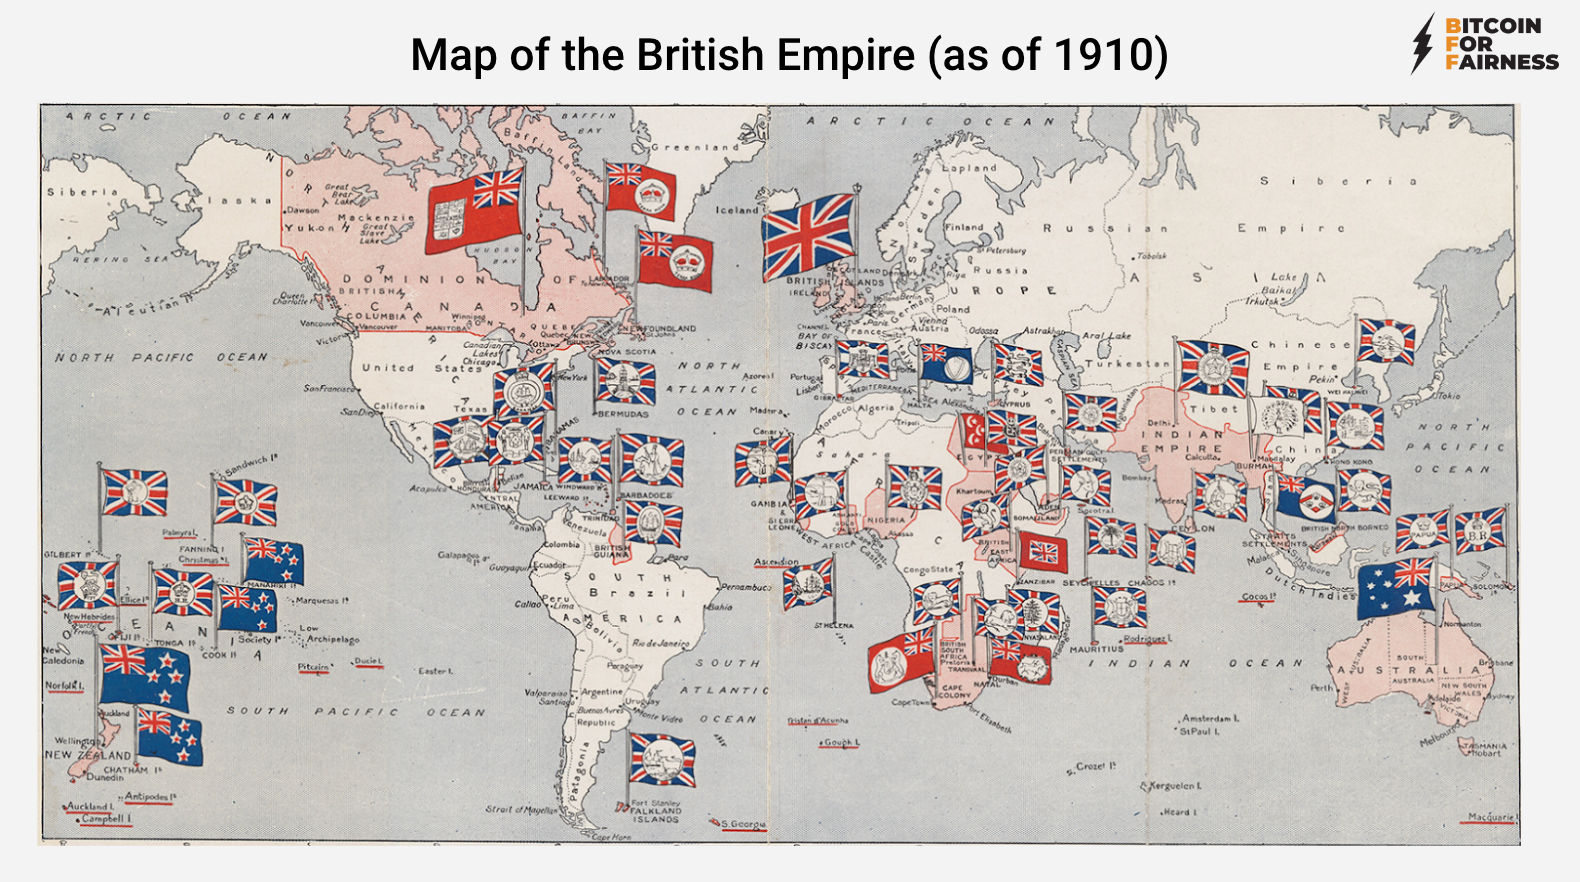 Map of the British Empire in 1910